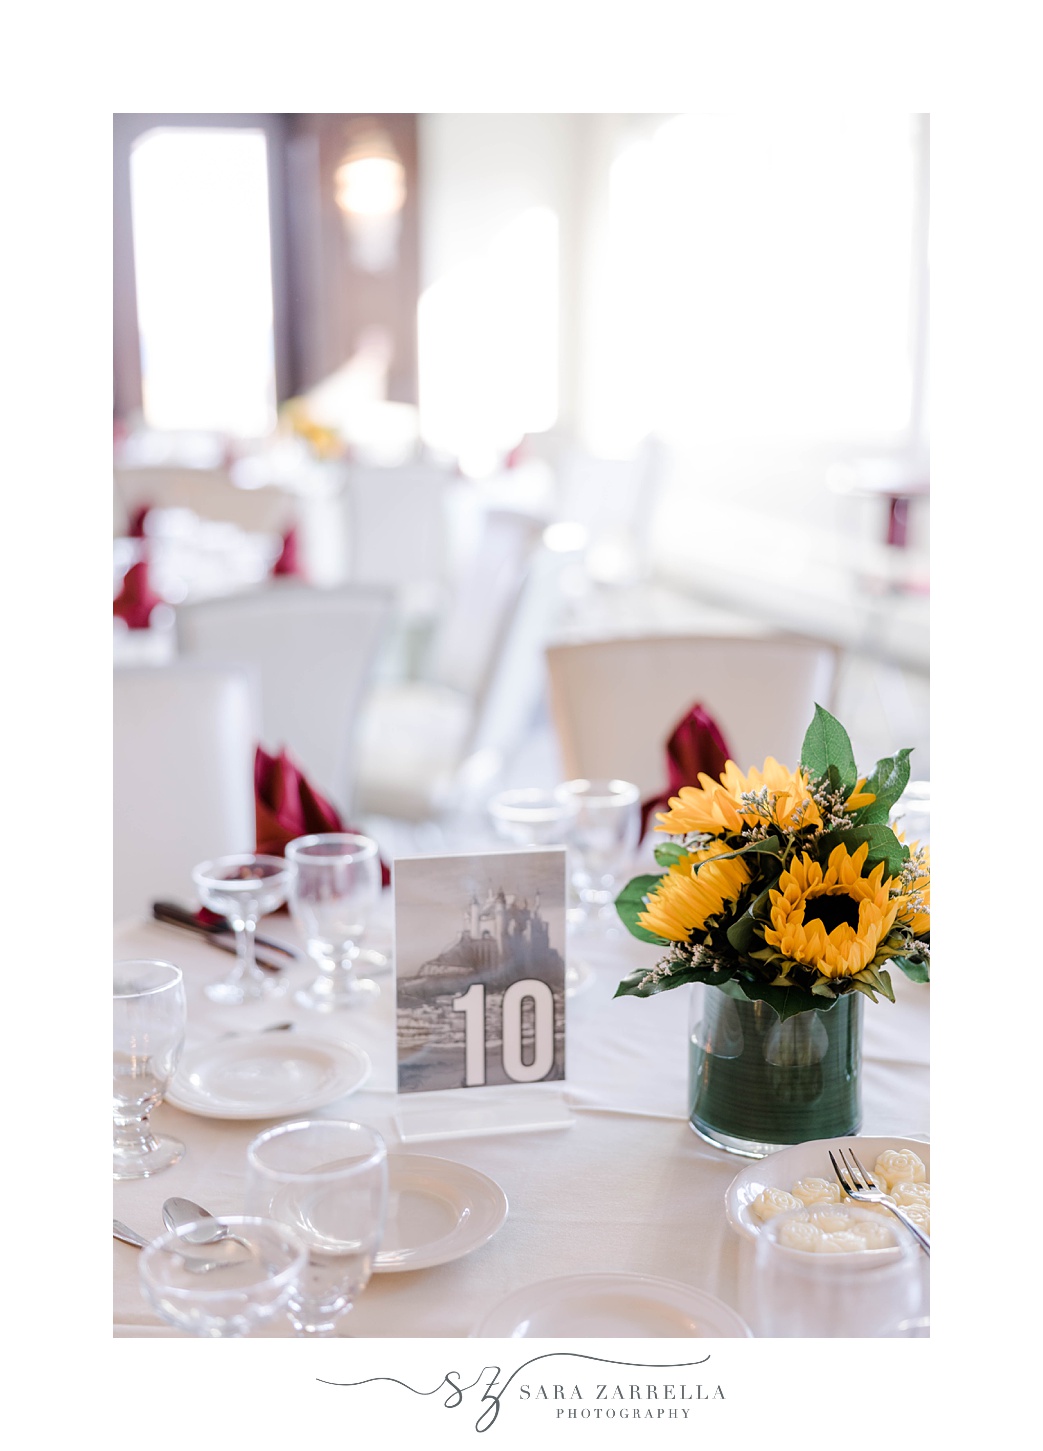 fall wedding reception decor with sunflower centerpieces at Quidnessett Country Club